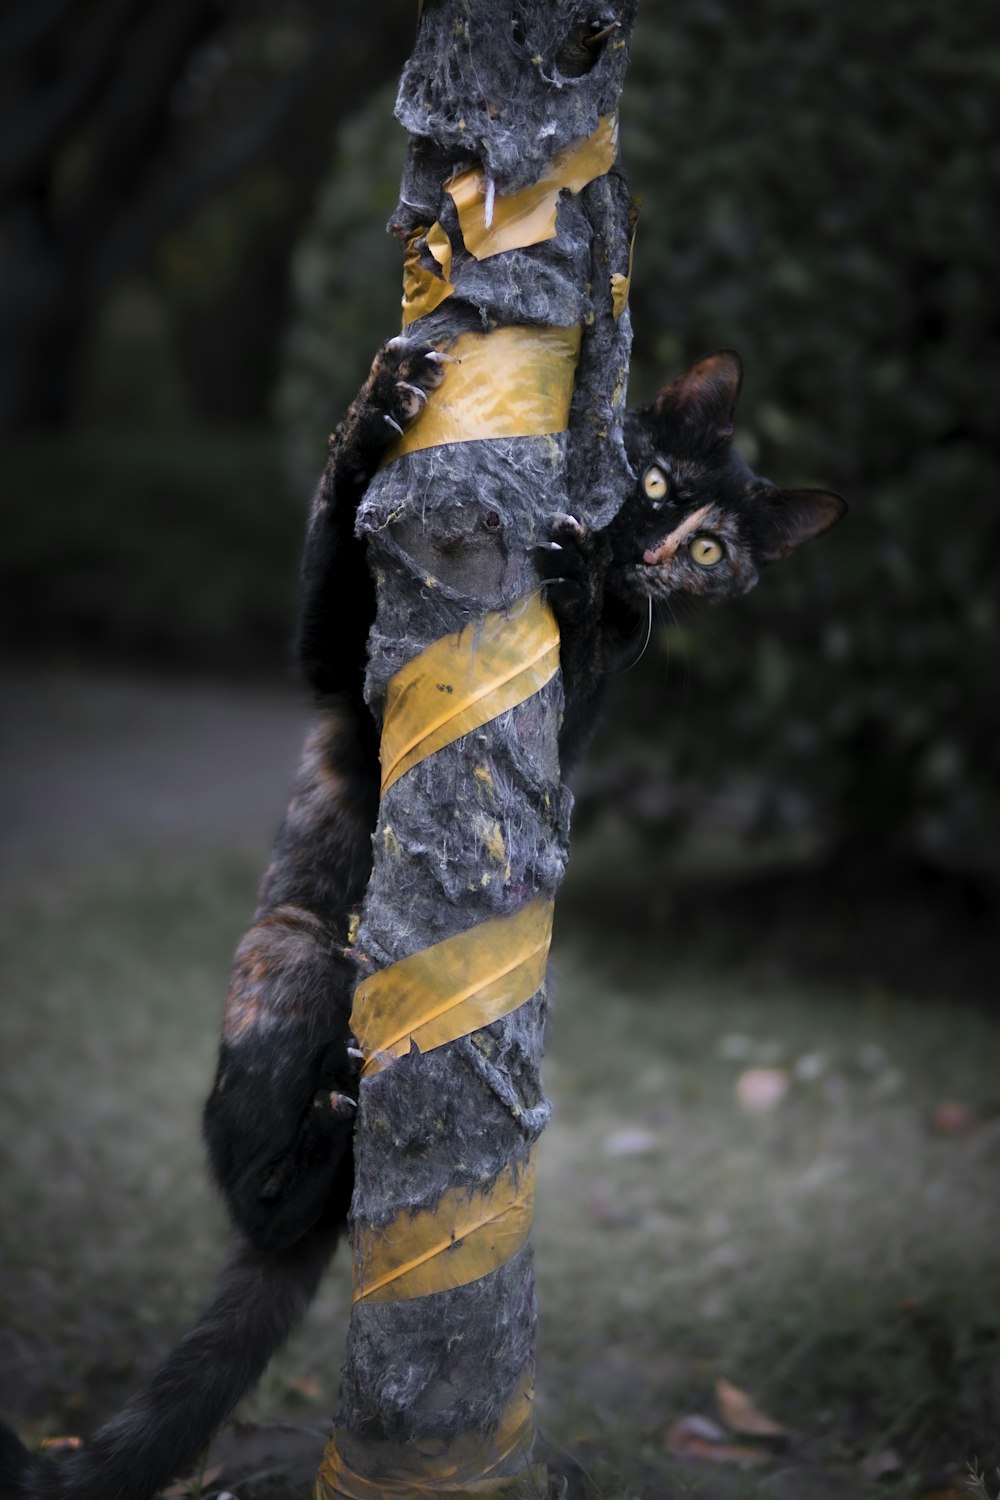 a cat climbing on a pole with a yellow and black striped tie